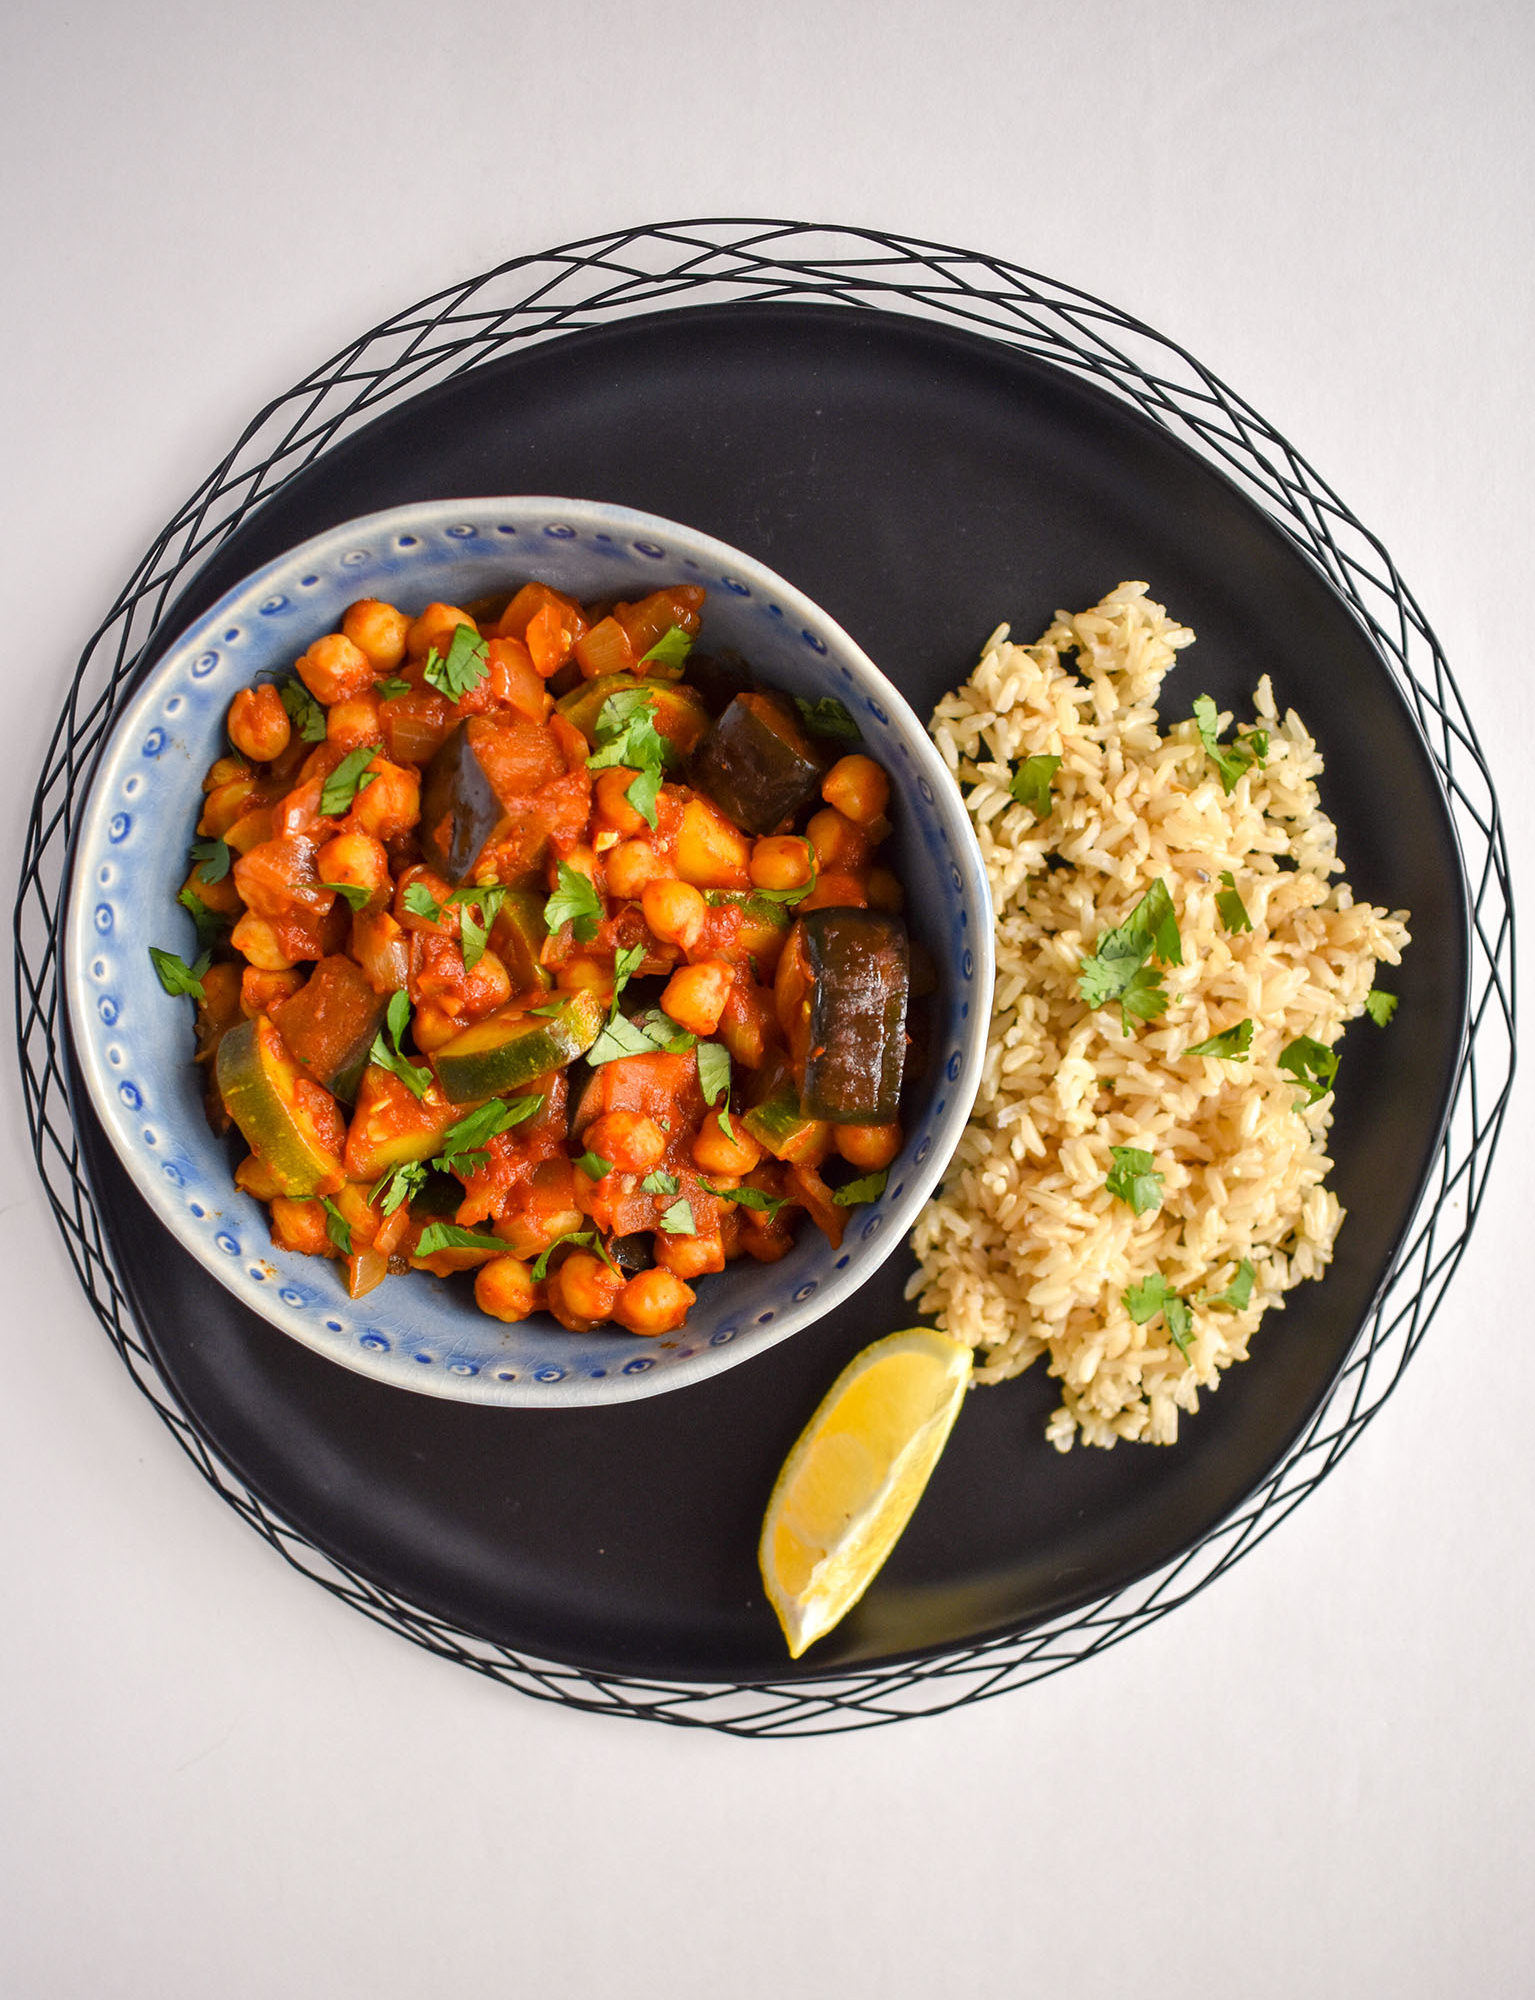 Chana masala with eggplant and zucchini and a side of rice- 3 summer ingredients and 3 meals.